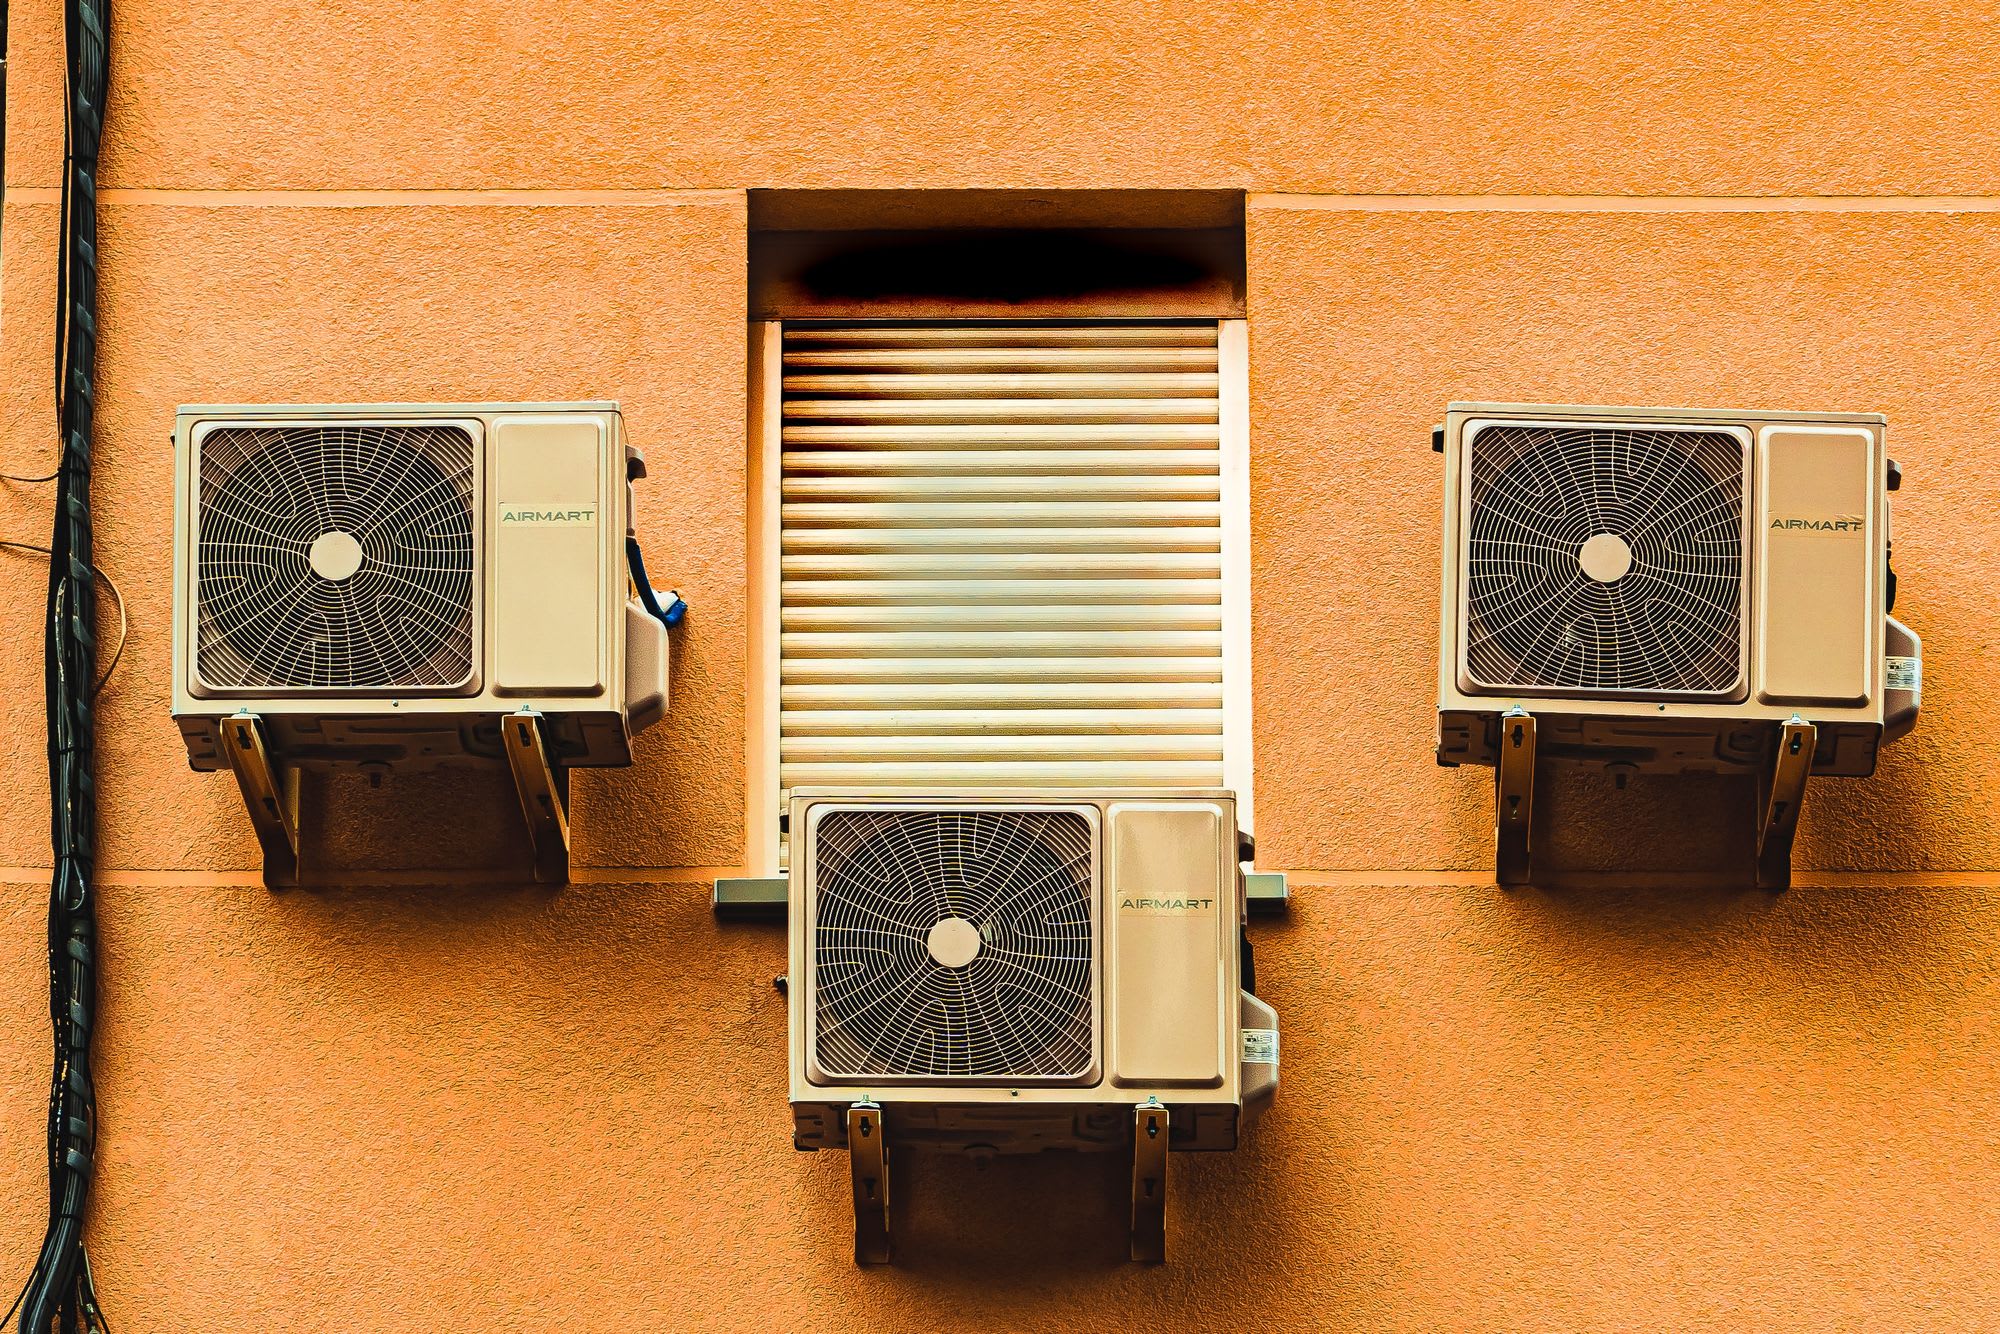 The Hot Homeowner's Guide to HVAC - Wildgrid Home